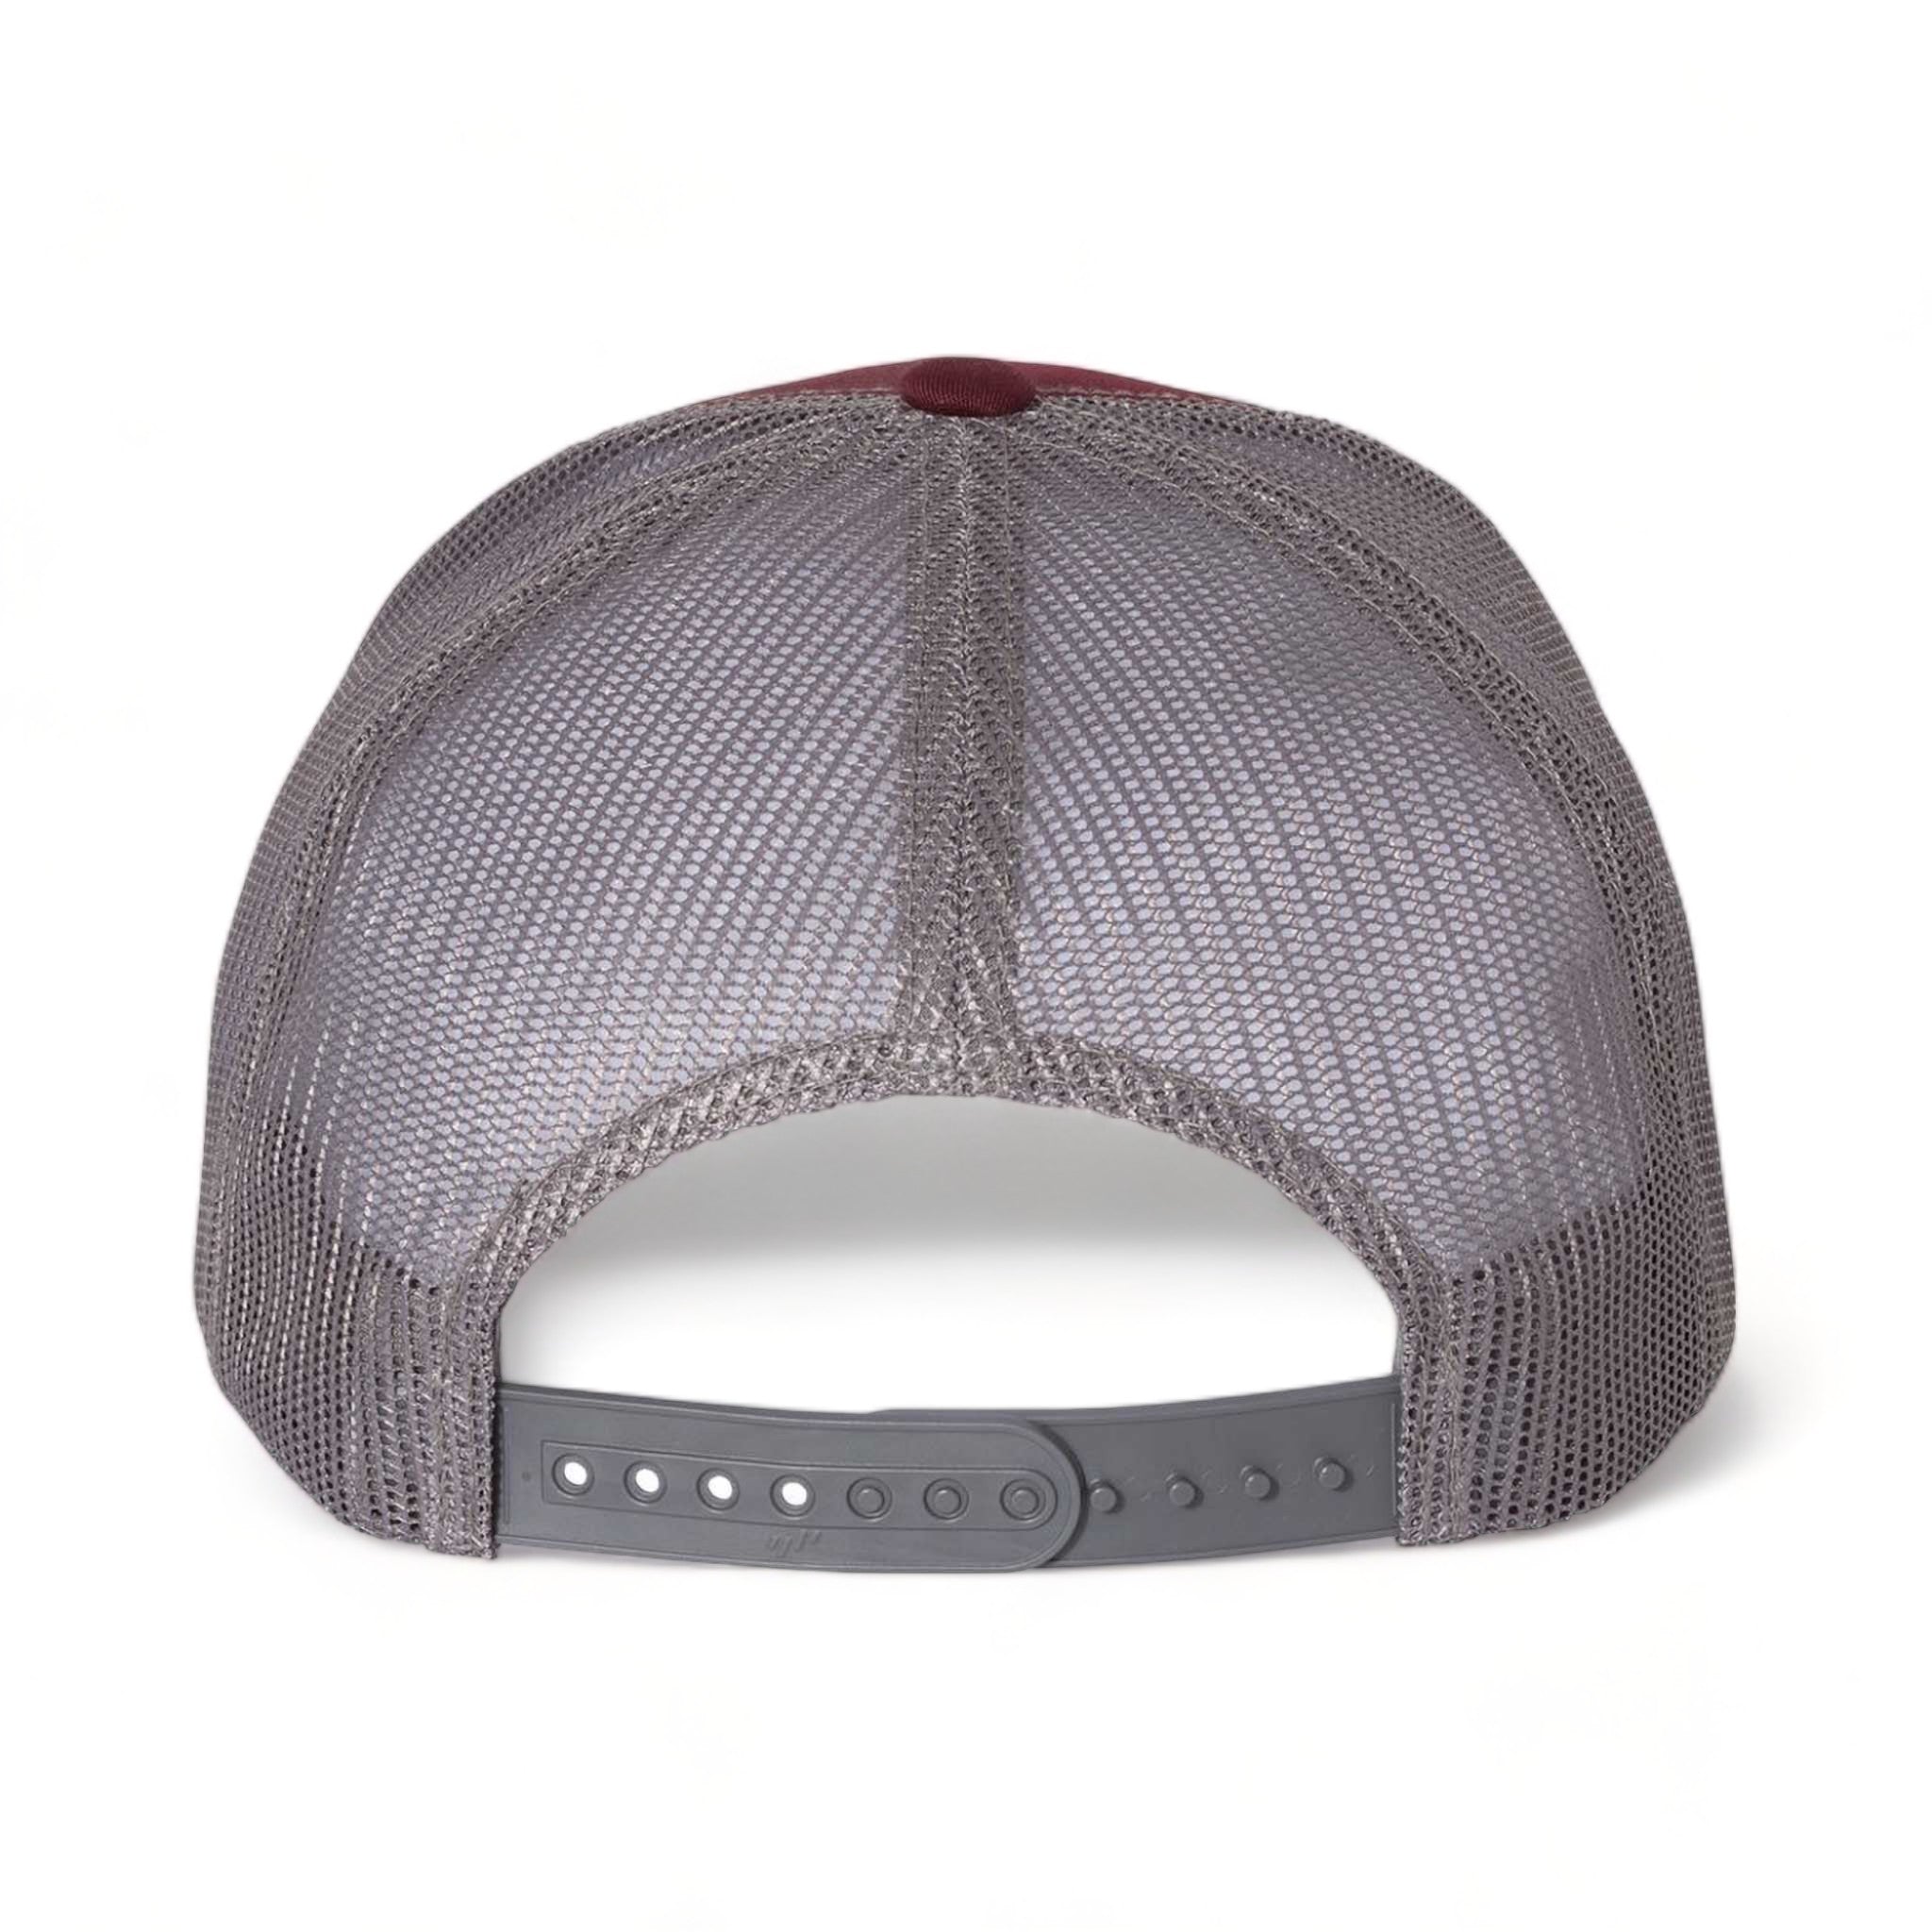 Back view of YP Classics 6606 custom hat in maroon and grey